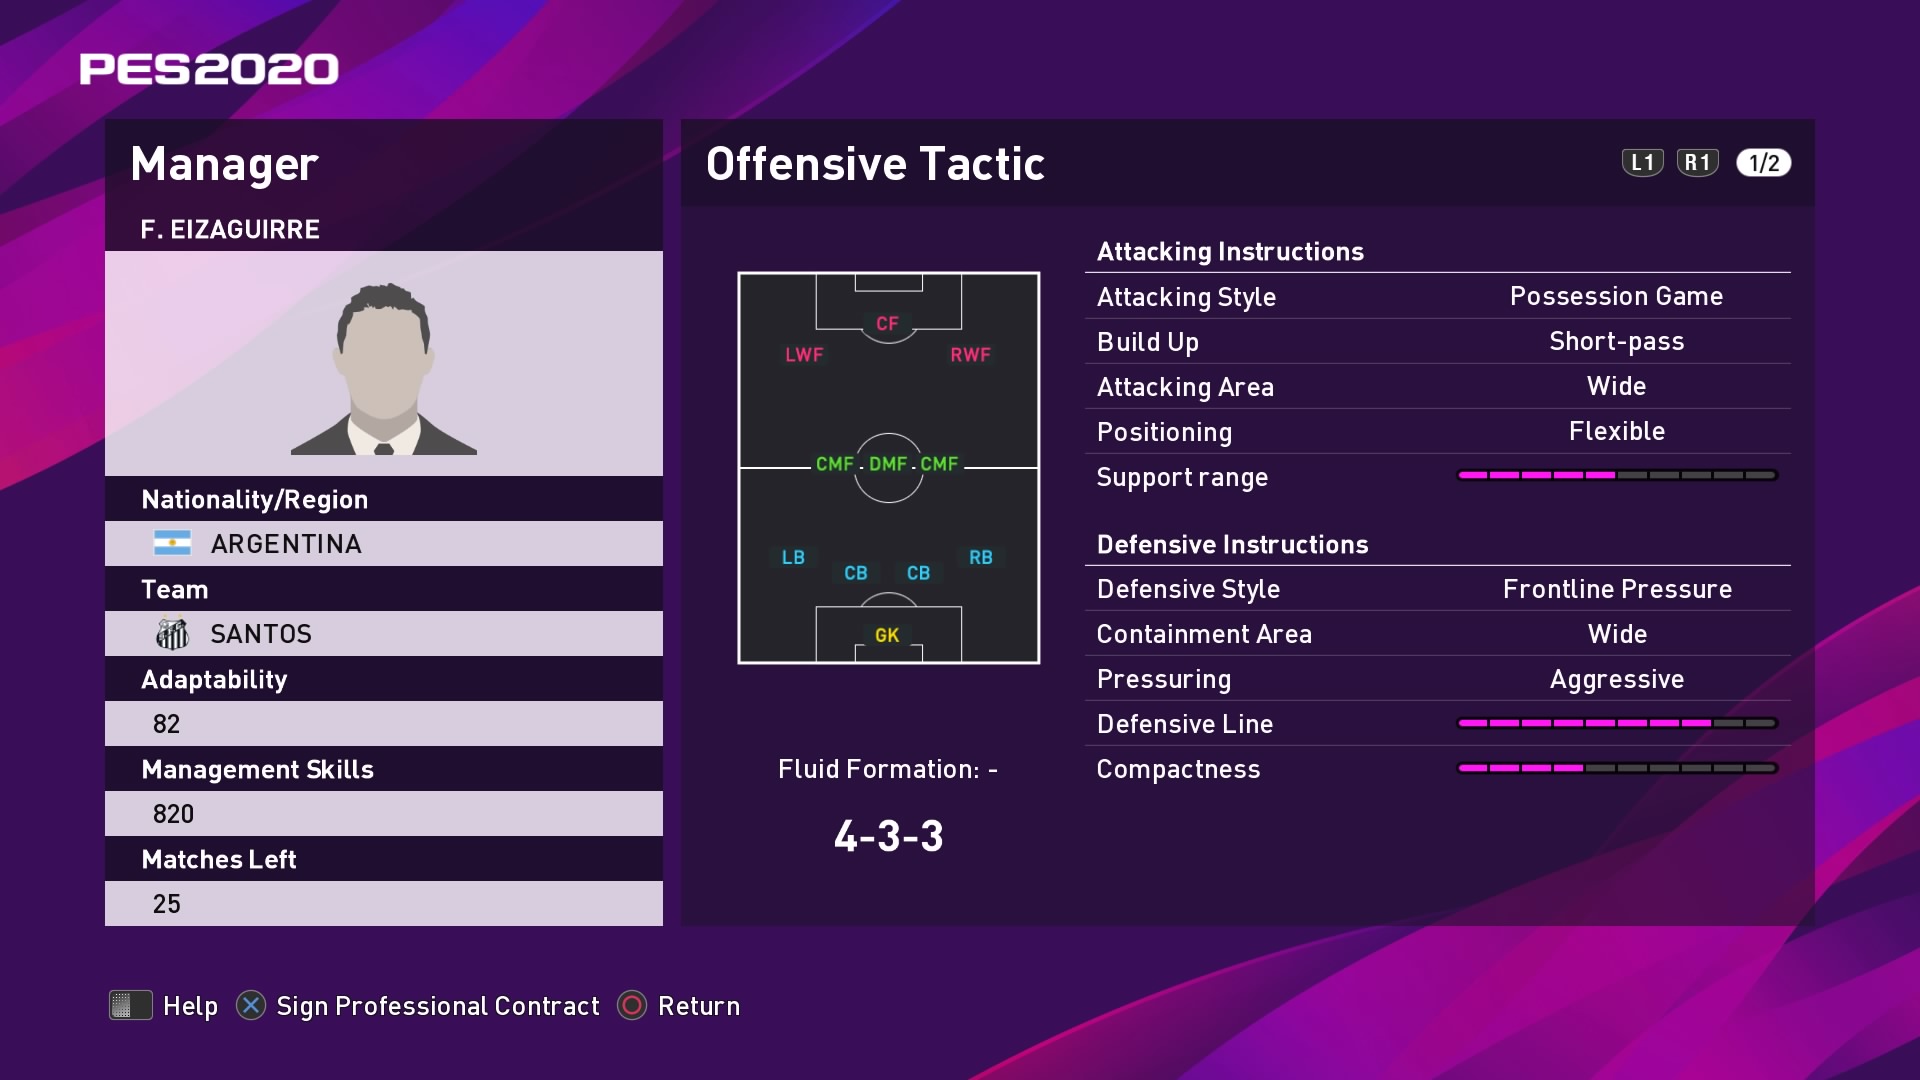 F. Eizaguirre (Jorge Sampaoli) Offensive Tactic in PES 2020 myClub